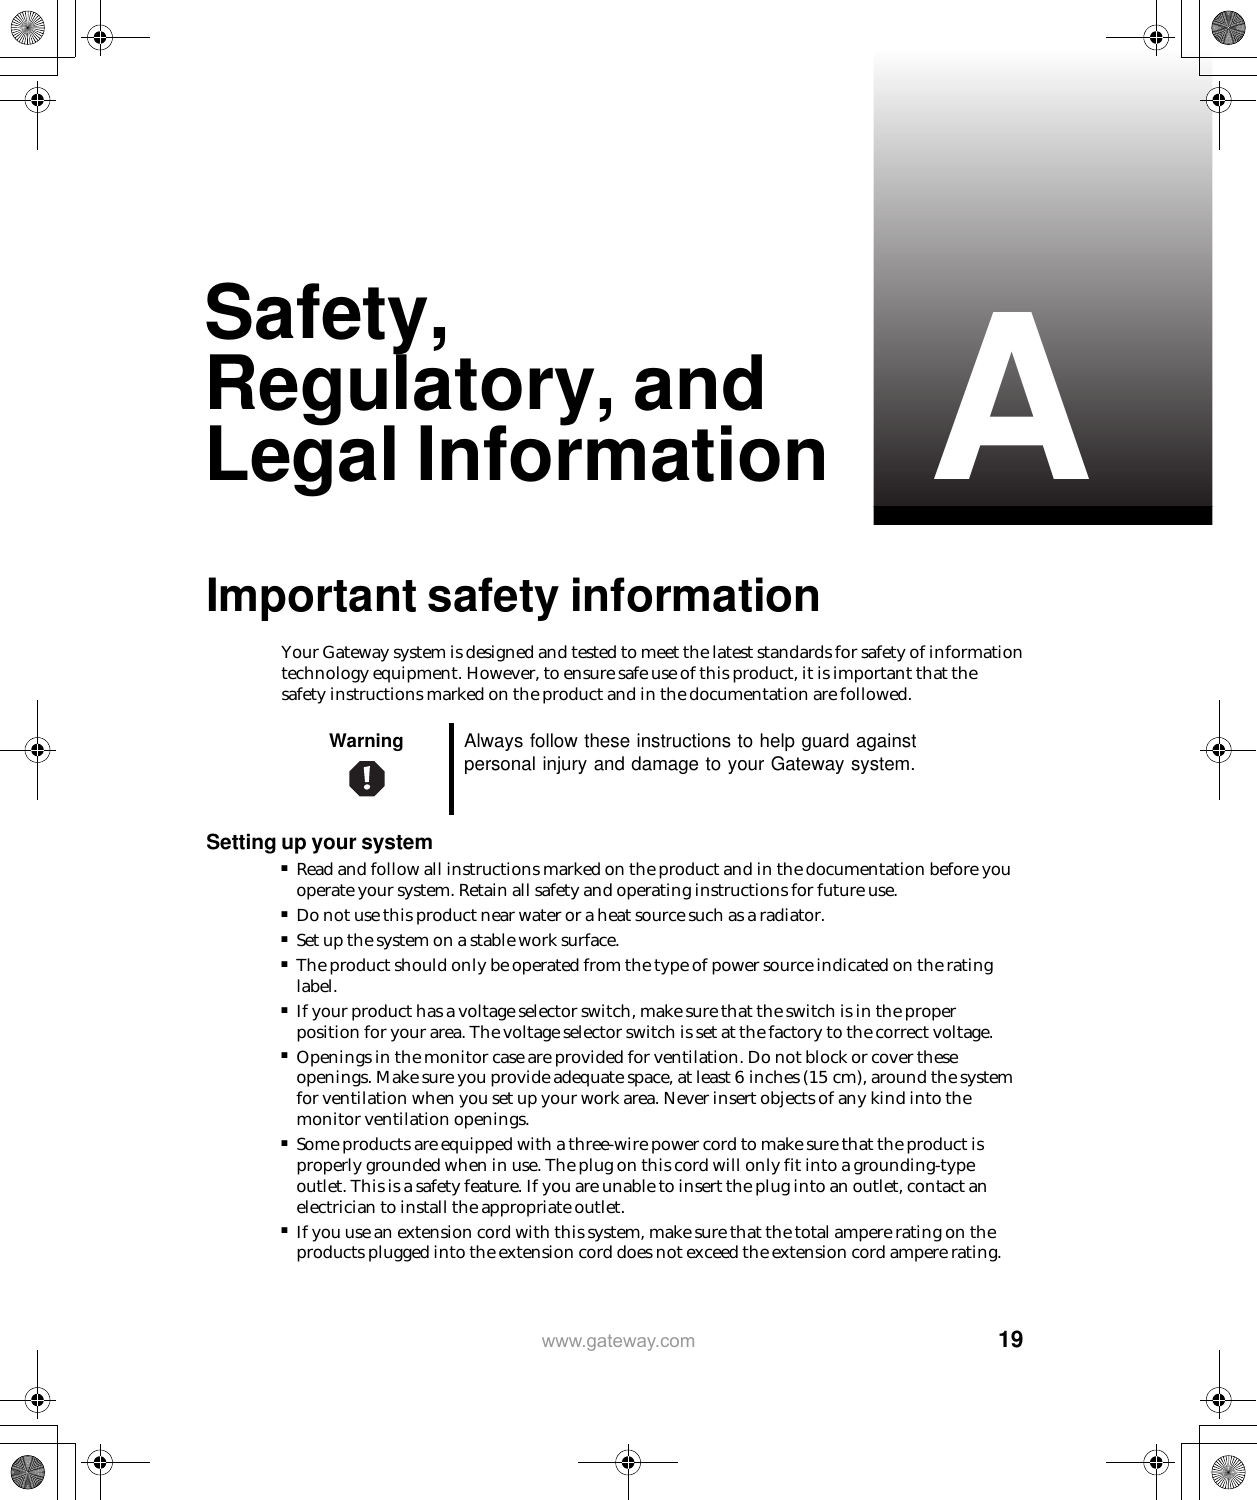   19Awww.gateway.comSafety, Regulatory, and Legal InformationImportant safety informationYour Gateway system is designed and tested to meet the latest standards for safety of information technology equipment. However, to ensure safe use of this product, it is important that the safety instructions marked on the product and in the documentation are followed.Setting up your system■Read and follow all instructions marked on the product and in the documentation before you operate your system. Retain all safety and operating instructions for future use.■Do not use this product near water or a heat source such as a radiator.■Set up the system on a stable work surface.■The product should only be operated from the type of power source indicated on the rating label.■If your product has a voltage selector switch, make sure that the switch is in the proper position for your area. The voltage selector switch is set at the factory to the correct voltage.■Openings in the monitor case are provided for ventilation. Do not block or cover these openings. Make sure you provide adequate space, at least 6 inches (15 cm), around the system for ventilation when you set up your work area. Never insert objects of any kind into the monitor ventilation openings.■Some products are equipped with a three-wire power cord to make sure that the product is properly grounded when in use. The plug on this cord will only fit into a grounding-type outlet. This is a safety feature. If you are unable to insert the plug into an outlet, contact an electrician to install the appropriate outlet.■If you use an extension cord with this system, make sure that the total ampere rating on the products plugged into the extension cord does not exceed the extension cord ampere rating.Warning Always follow these instructions to help guard against personal injury and damage to your Gateway system.